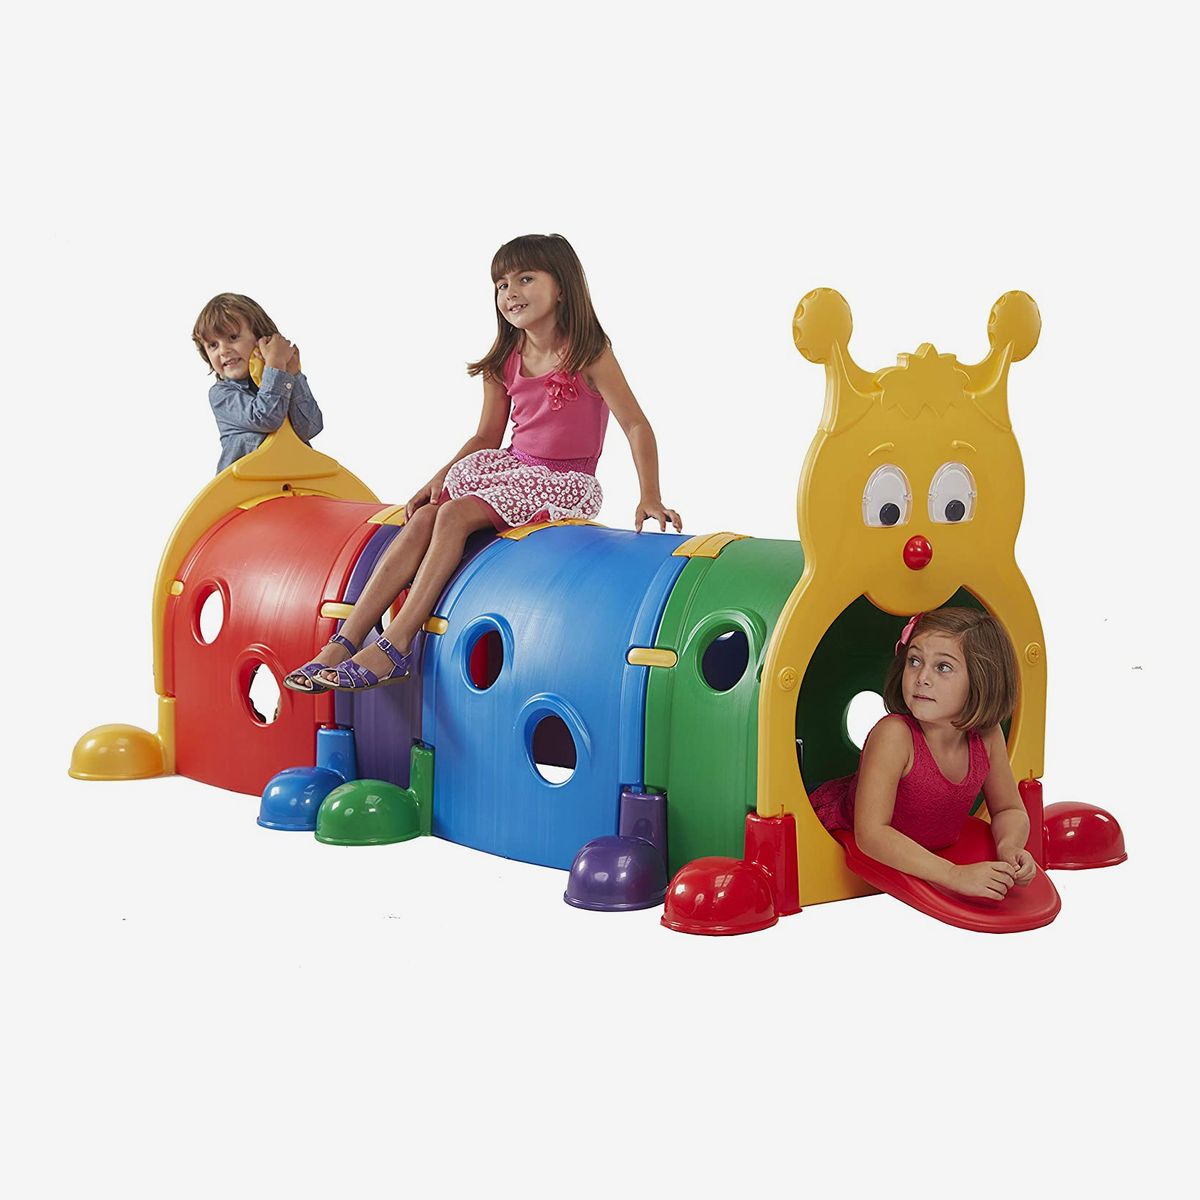 indoor climbing toys for toddlers